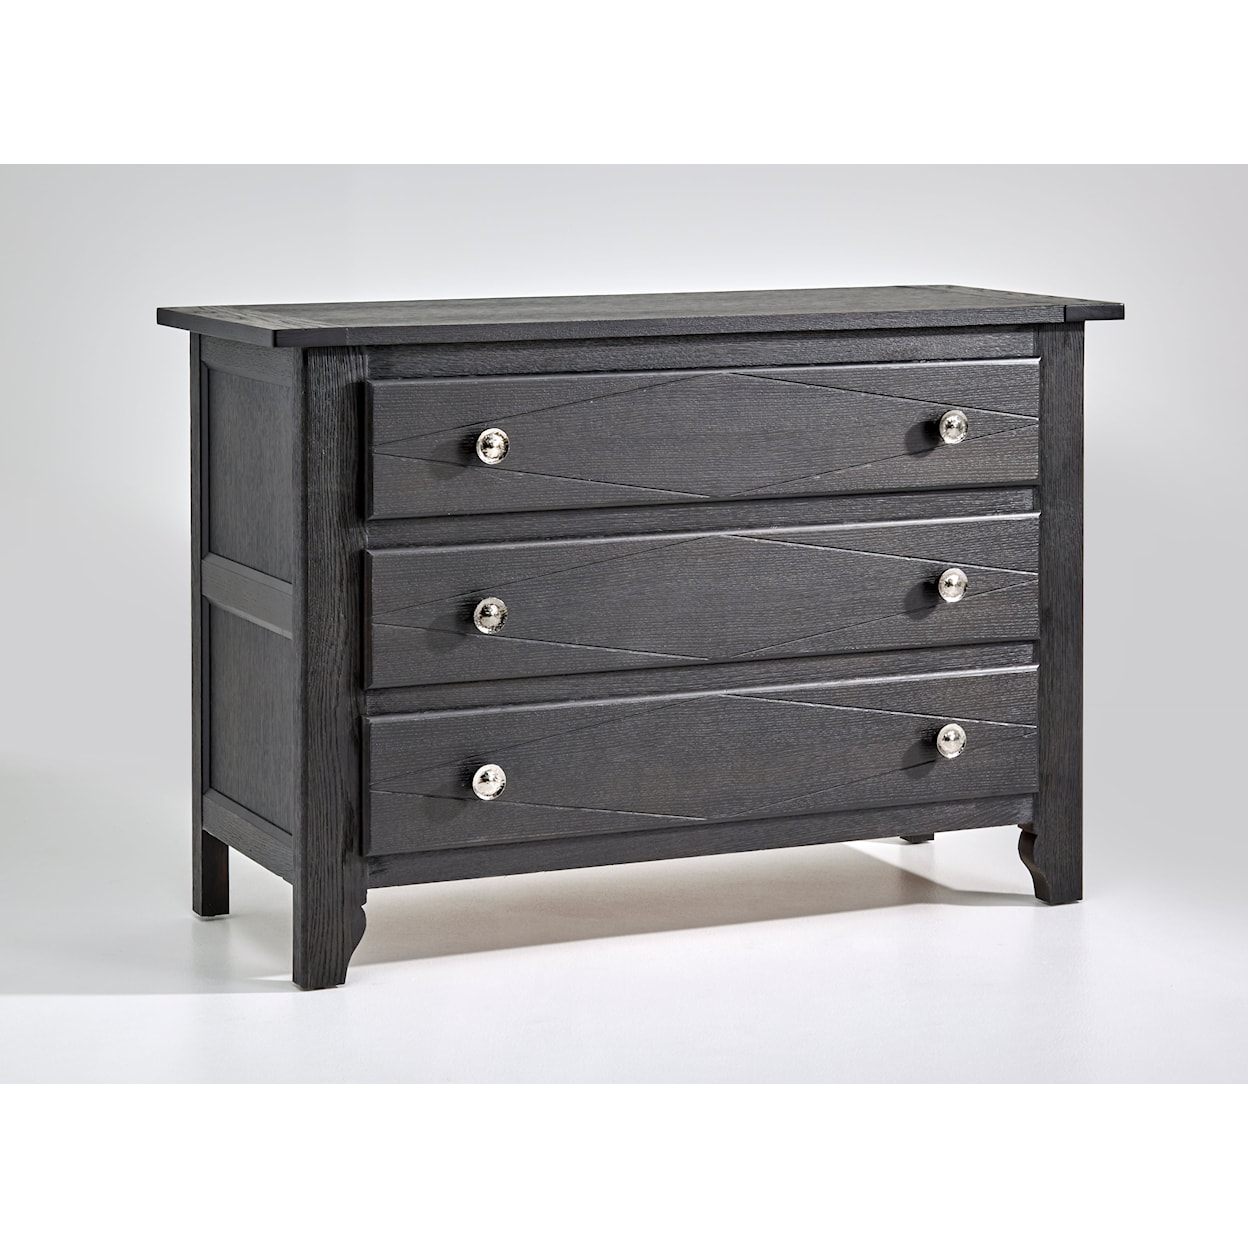 The Preserve Turner Accent Chest